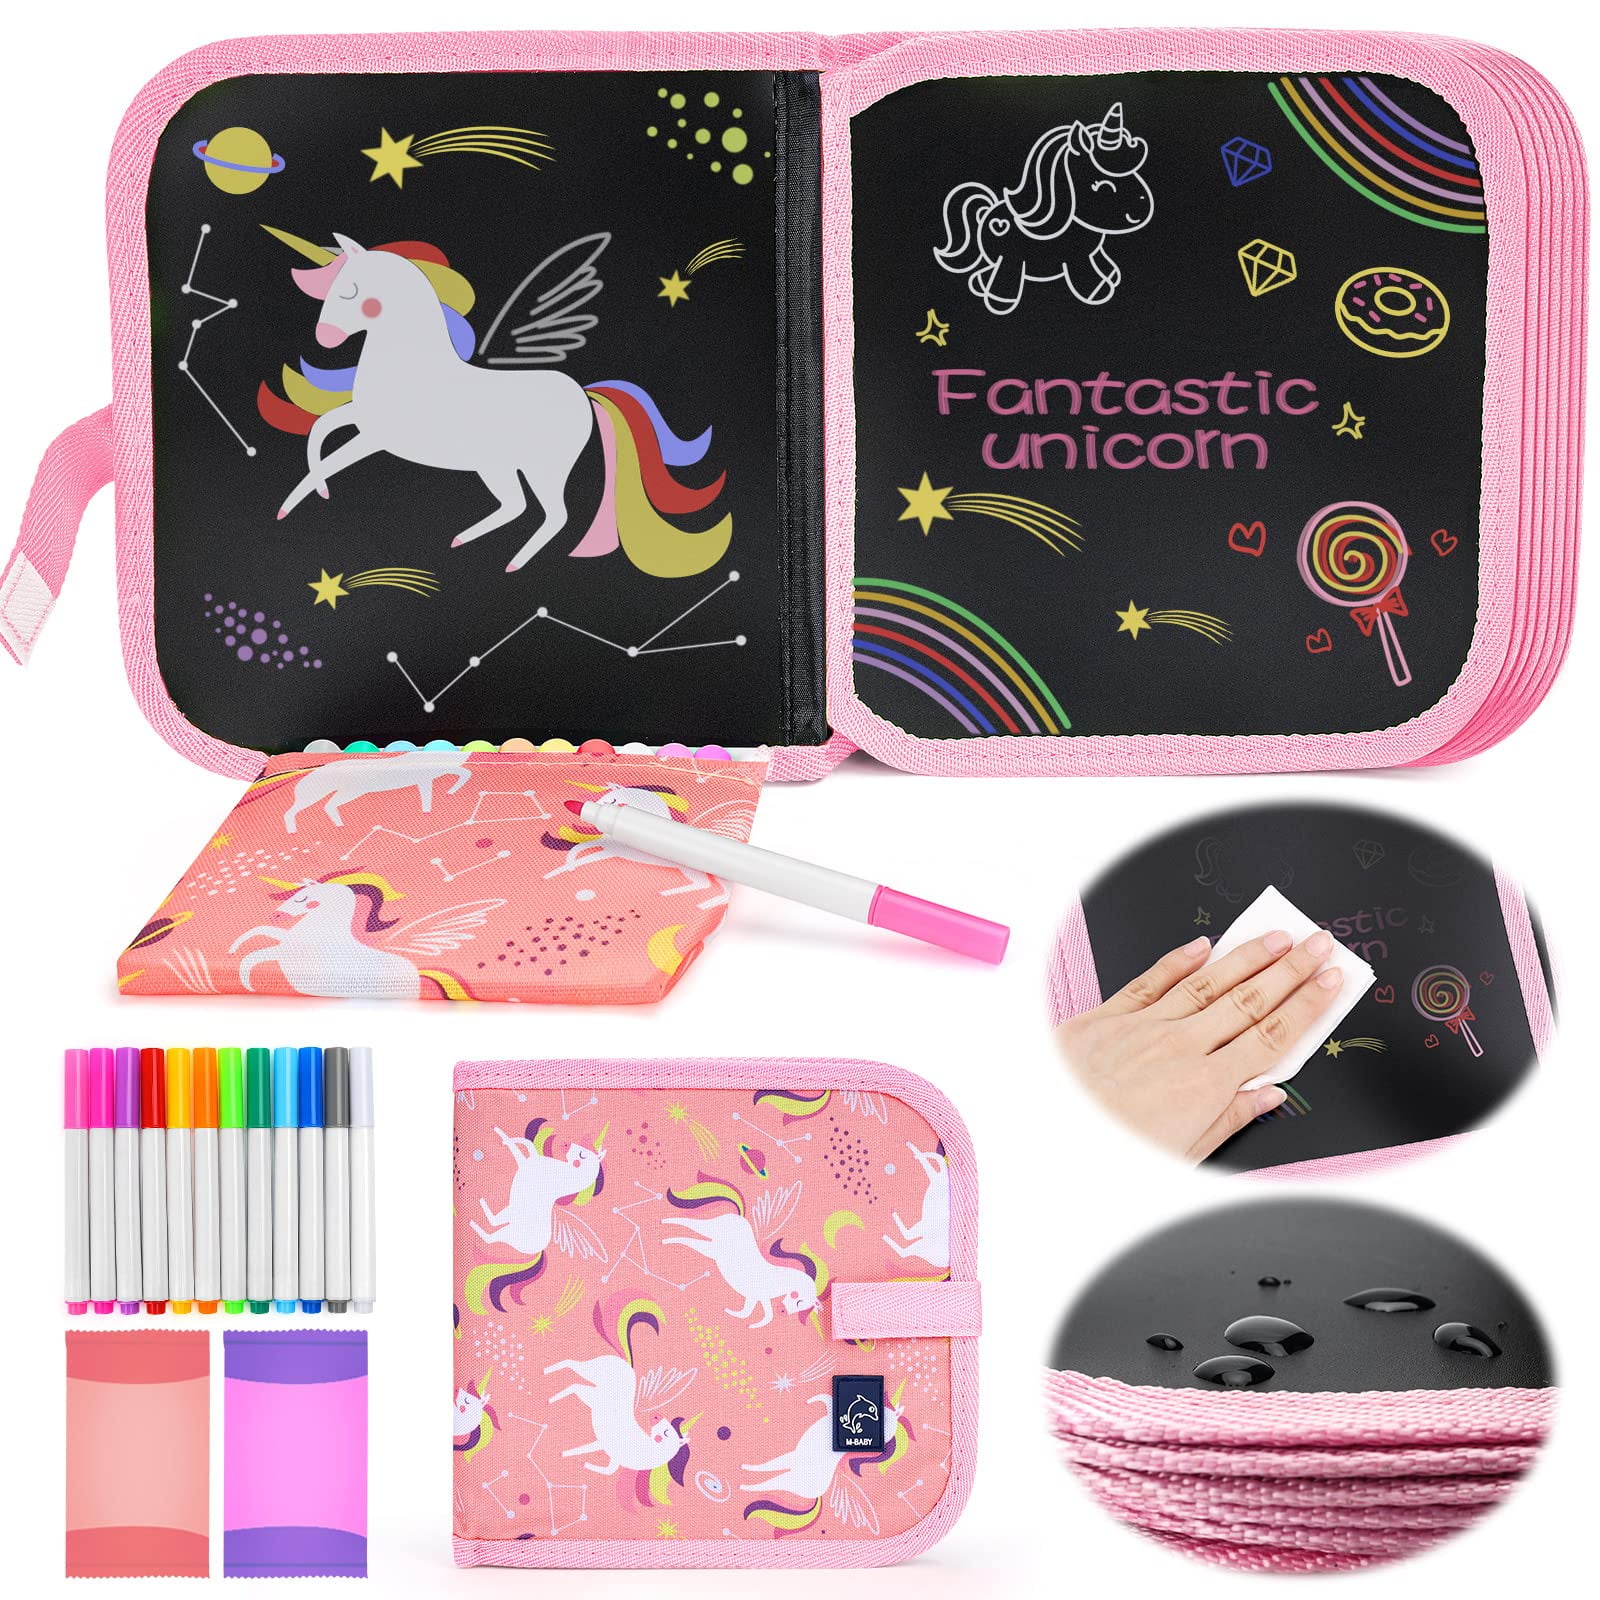 Pearoft Unicorn Gifts for Girls Age 5 6 7 8-Painting Unicorn Toys for Age 5 6  Year Olds Kids-Arts and Crafts for Kids Girls Age 6-12-Birthday Presents  Age 6+ 5D Diamond Painting